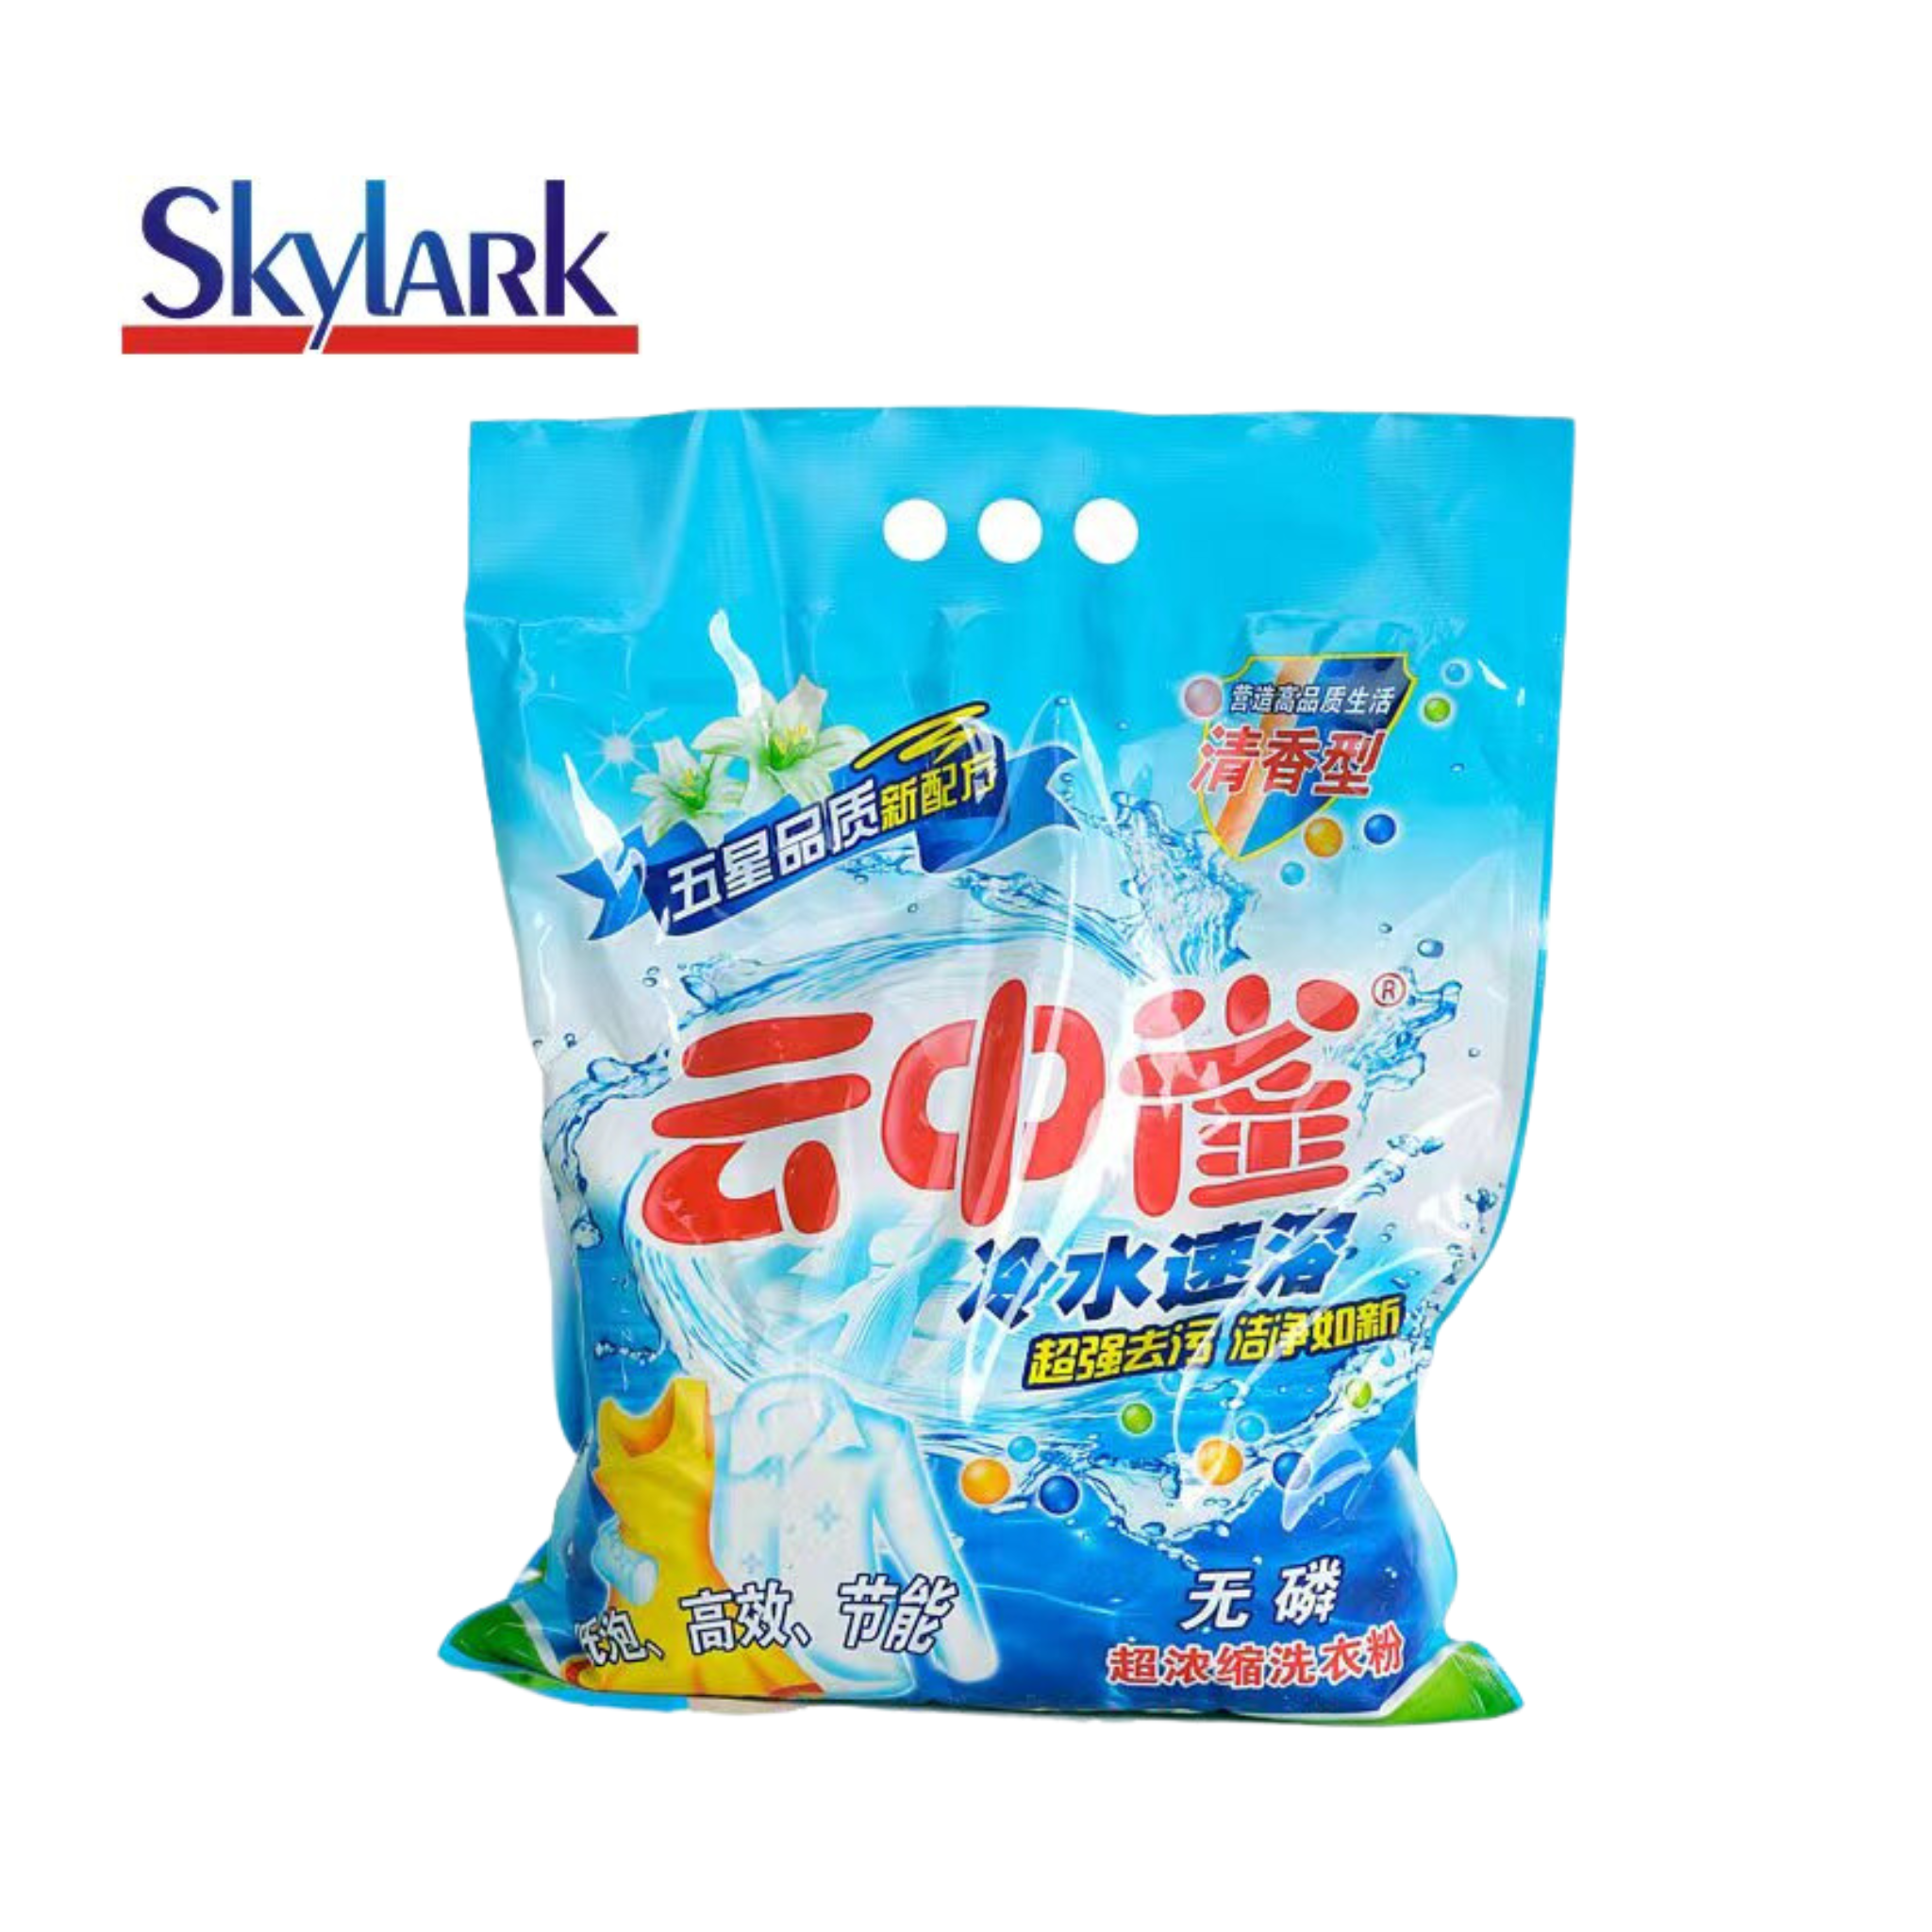 High Efficiency Lemon Scent Laundry Powder With Excellent Performance